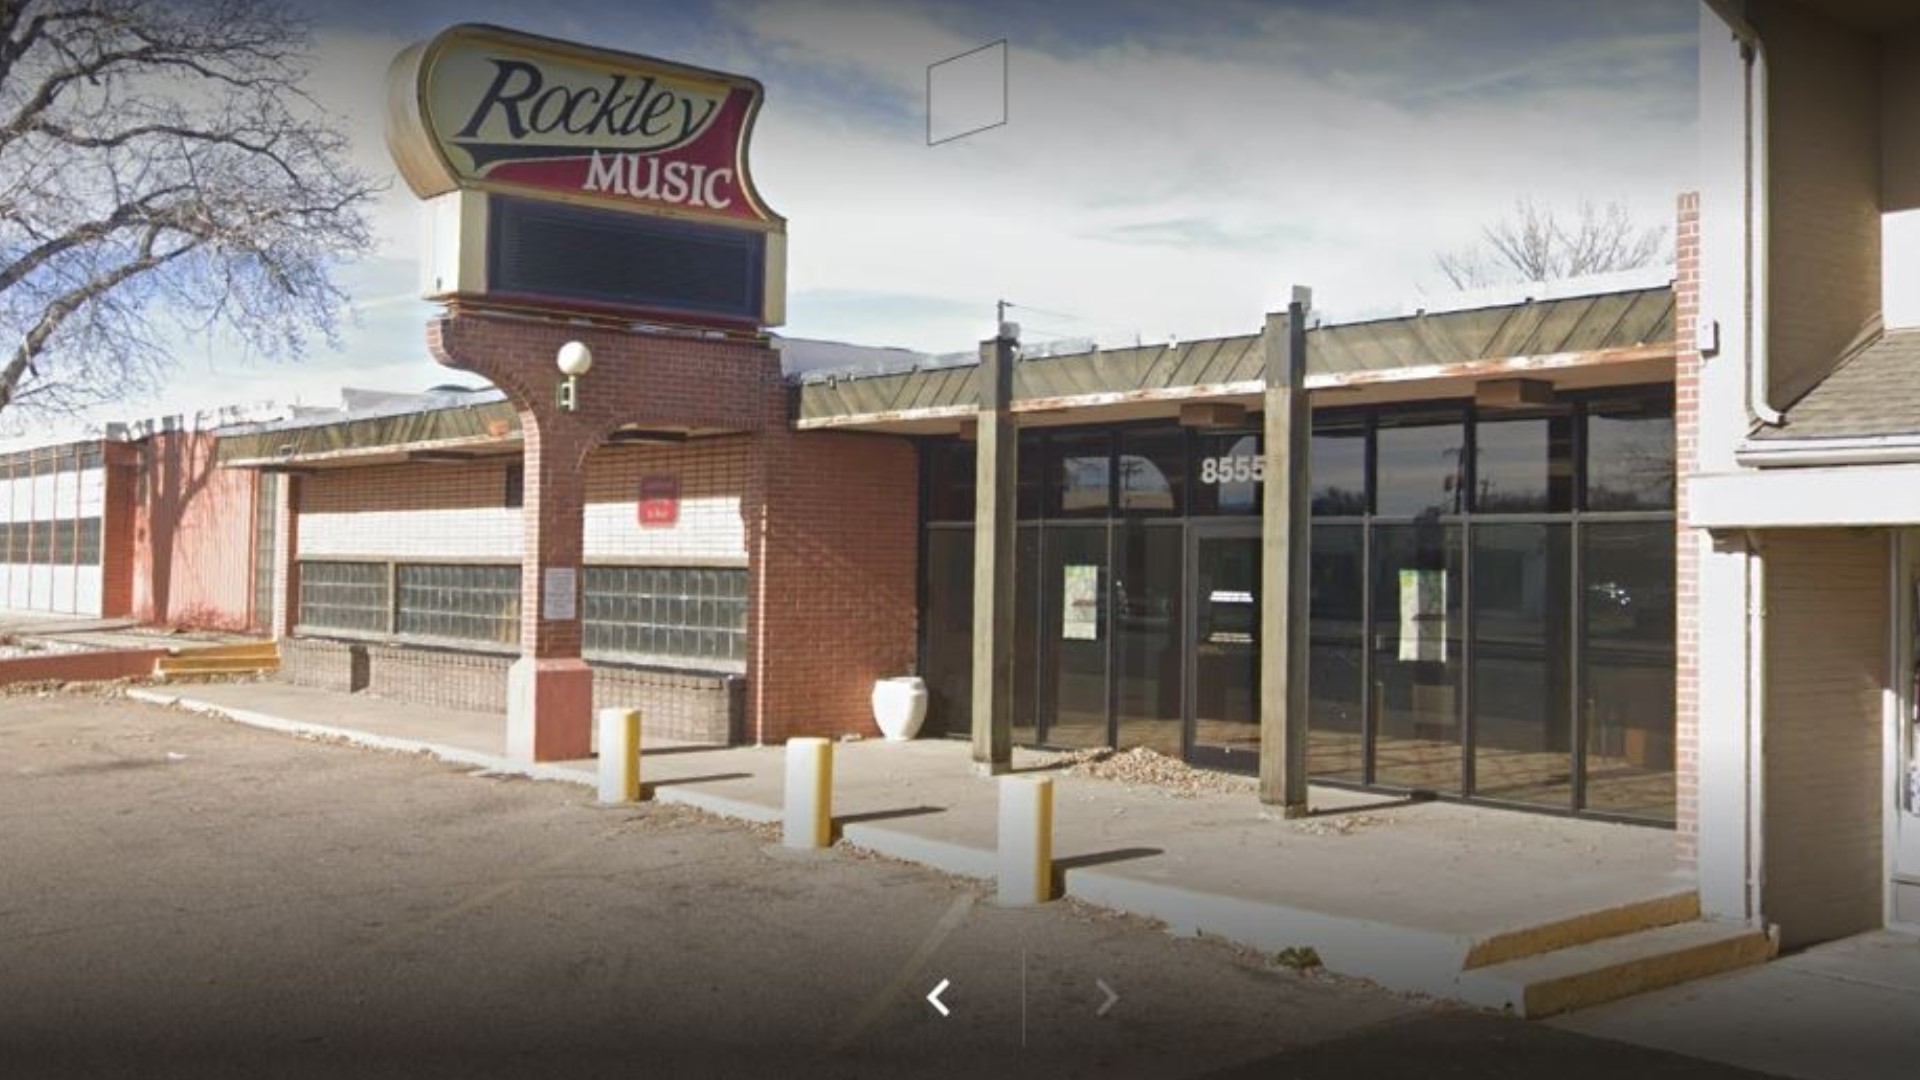 The musical instrument store has been a fixture on West Colfax since 1946.